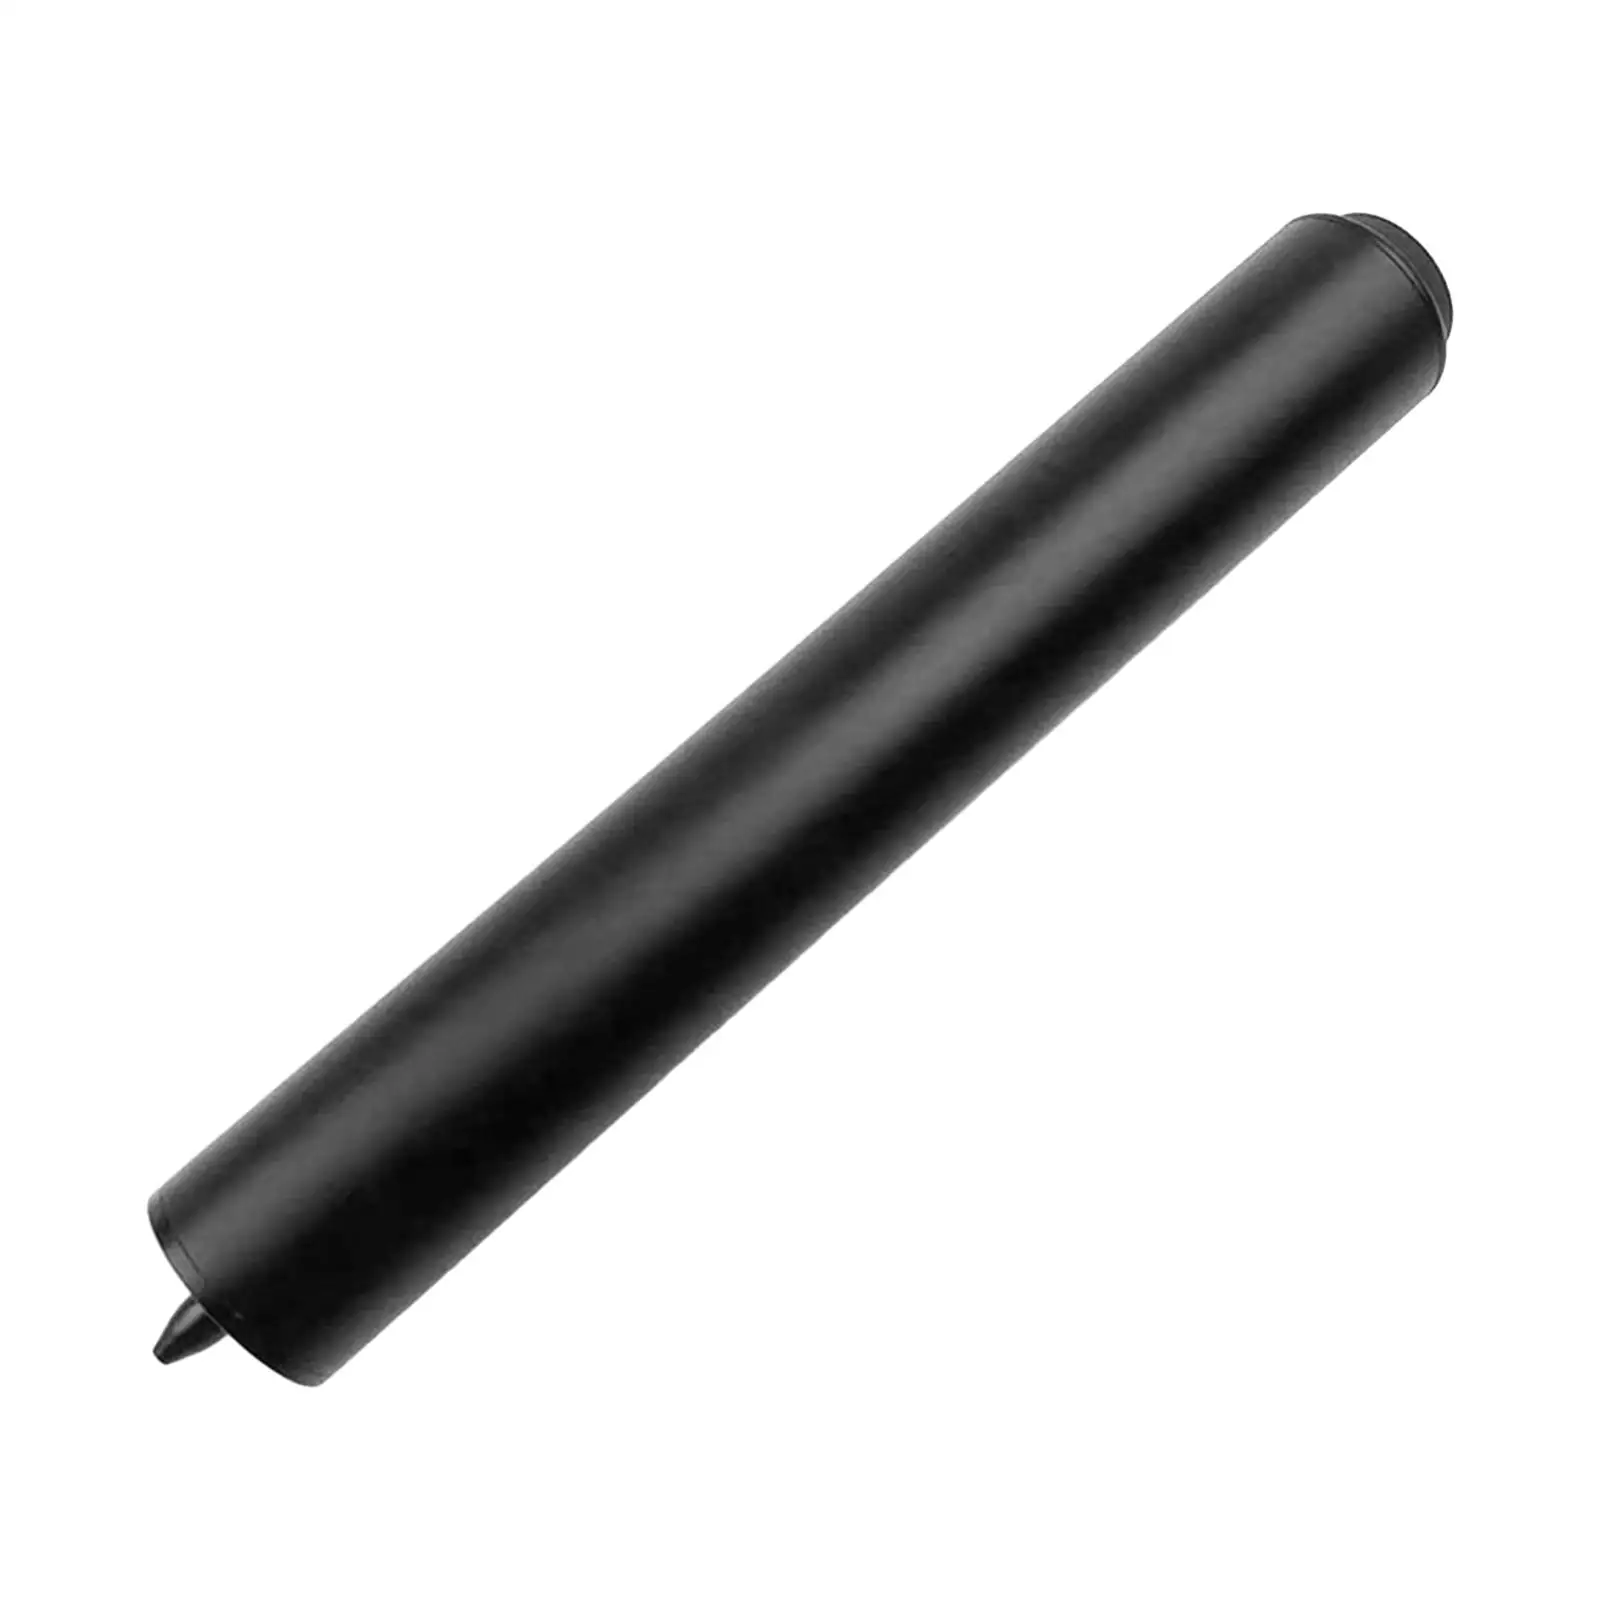 Pool Cue Extender, Snooker Cue Extension, Cue End Lengthener, Billiards Pool Cue Extension for Beginners Enthusiast Accessory